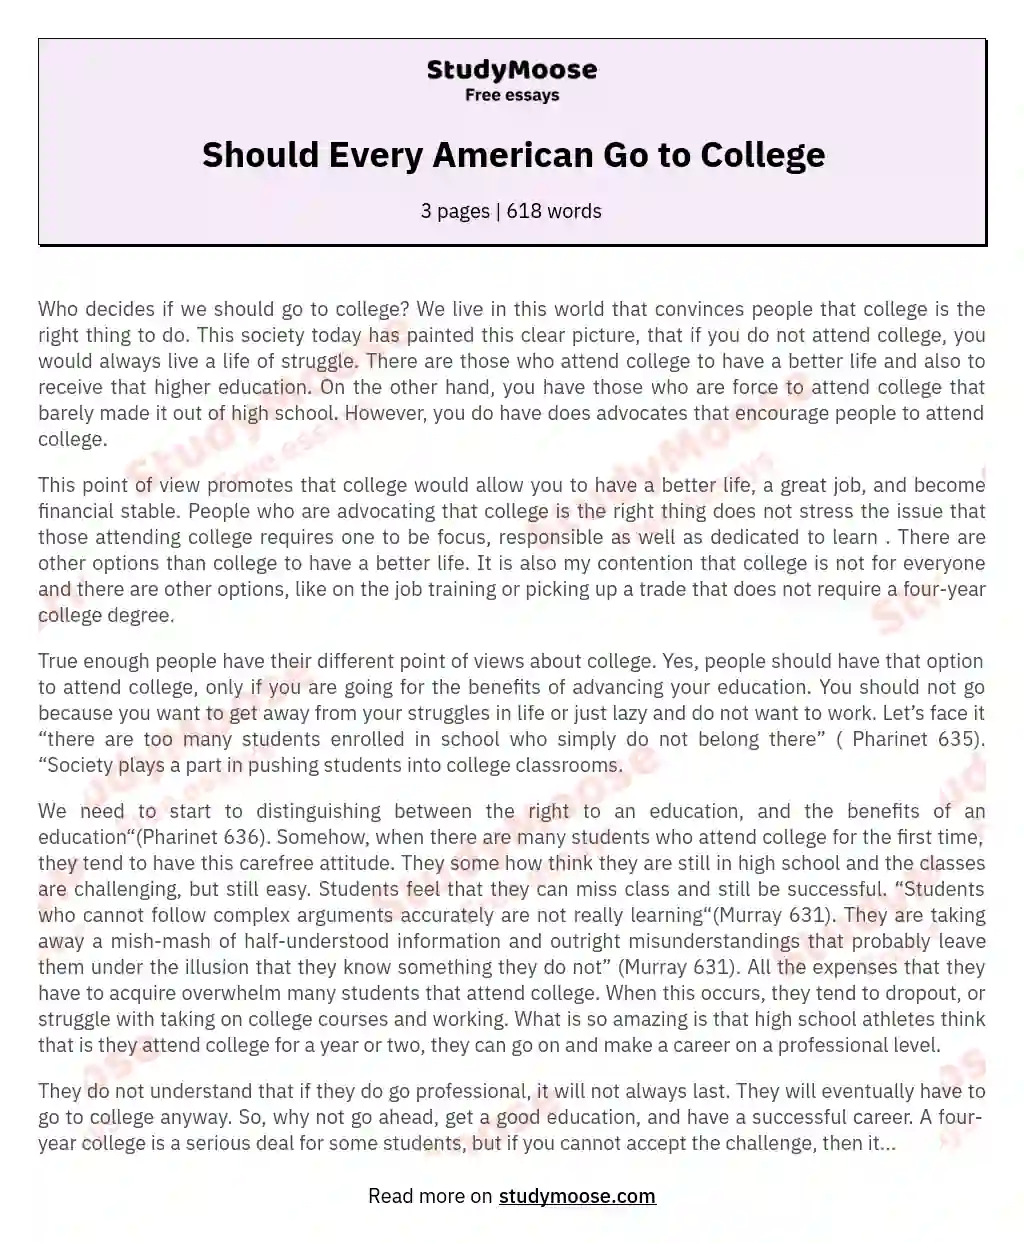 Should Every American Go to College essay